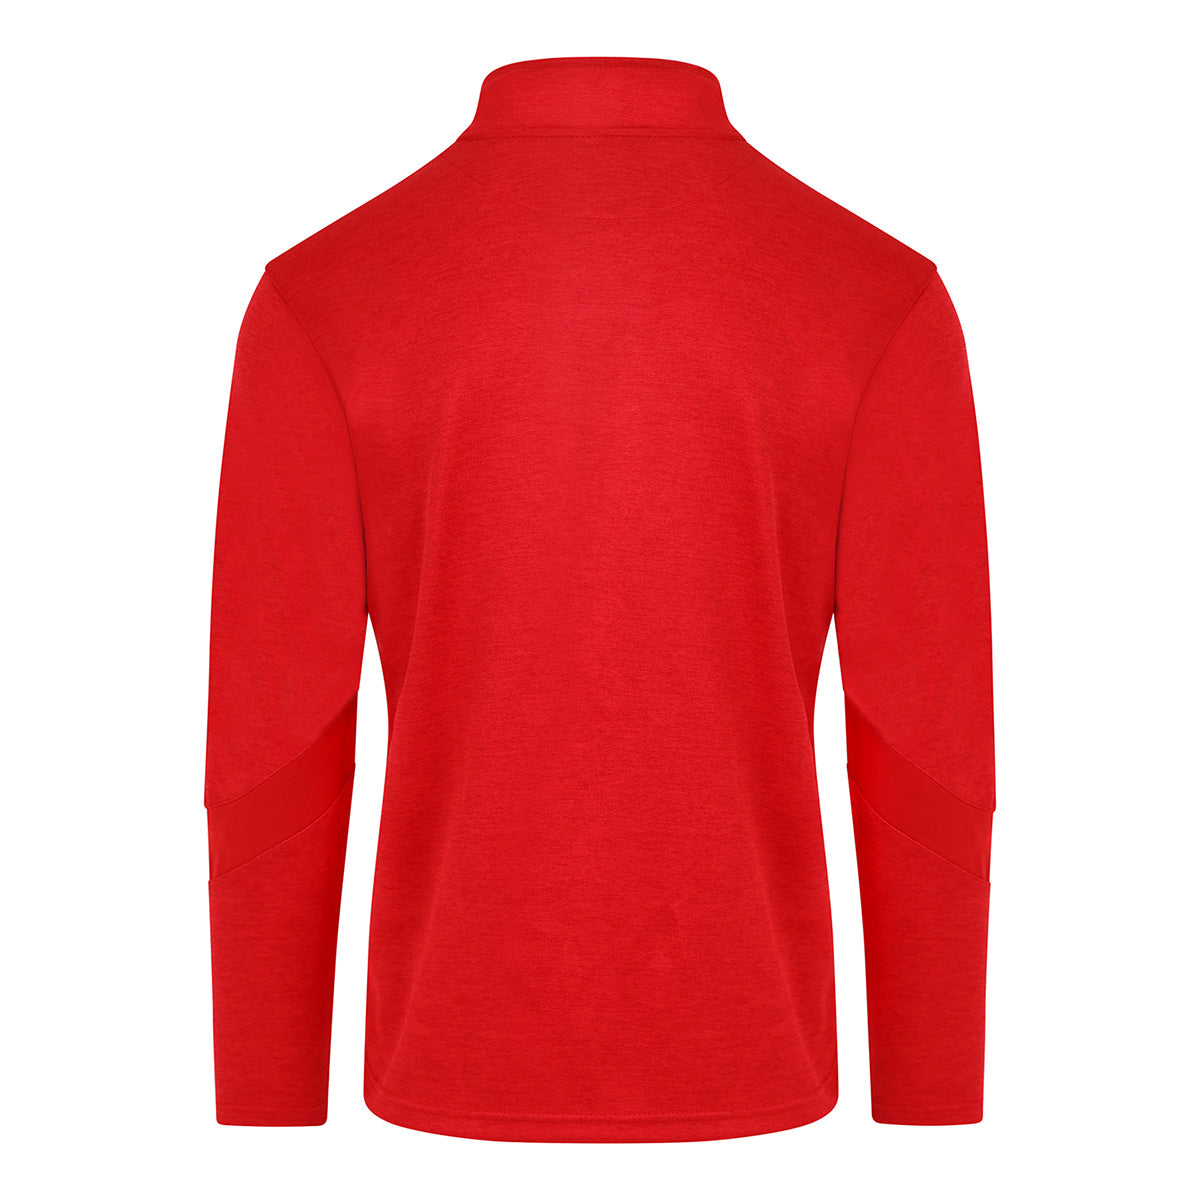 Mc Keever Caheragh Tadgh McCarthy's Core 22 1/4 Zip Top - Adult - Red